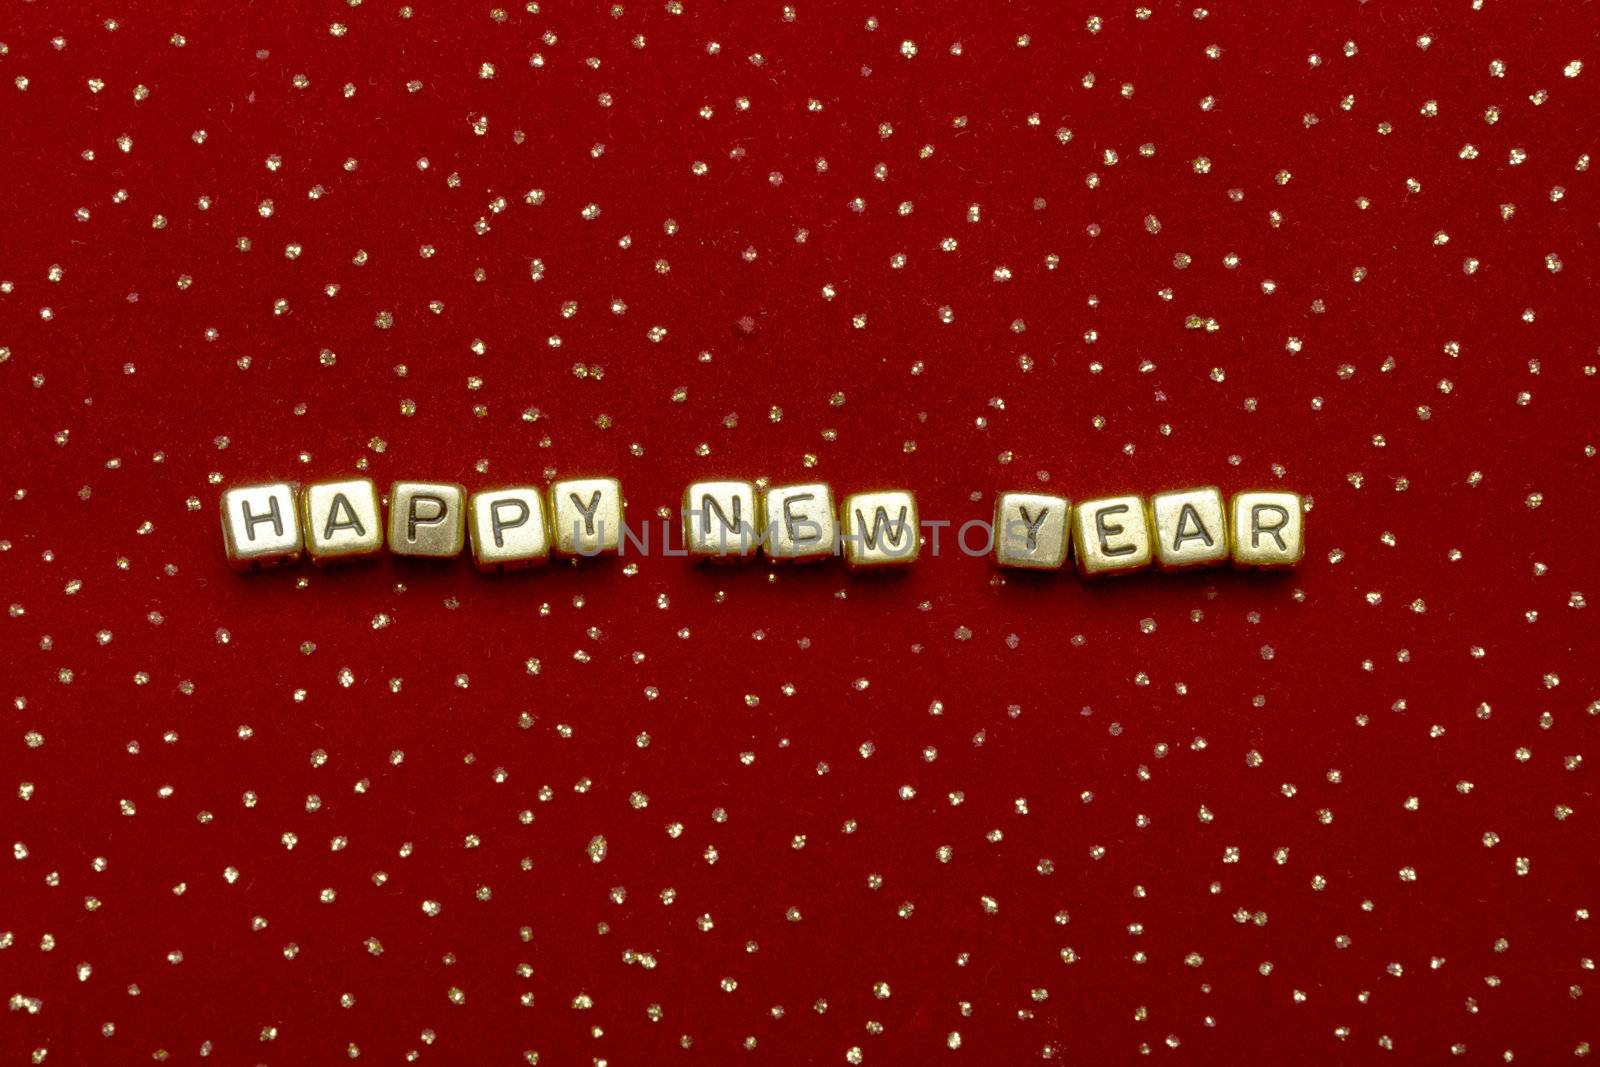 photo of phrase "happy new year" of beads on a red velvet with sequins